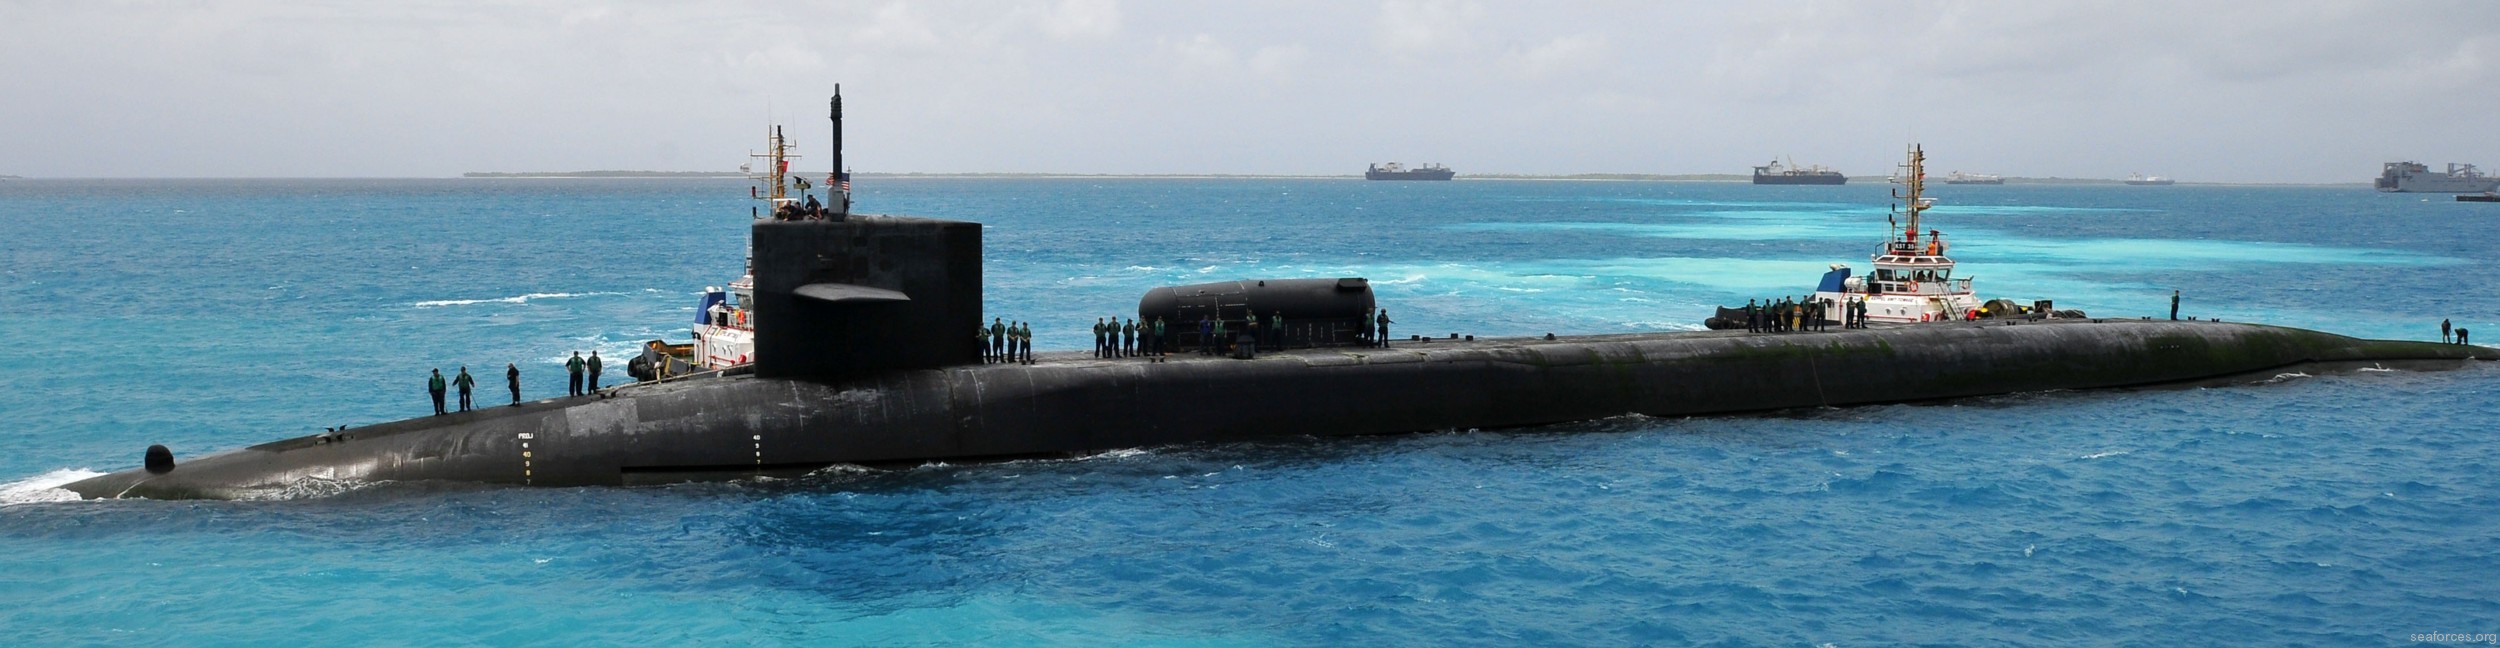 ssgn-729 uss georgia guided missile submarine 2011 21